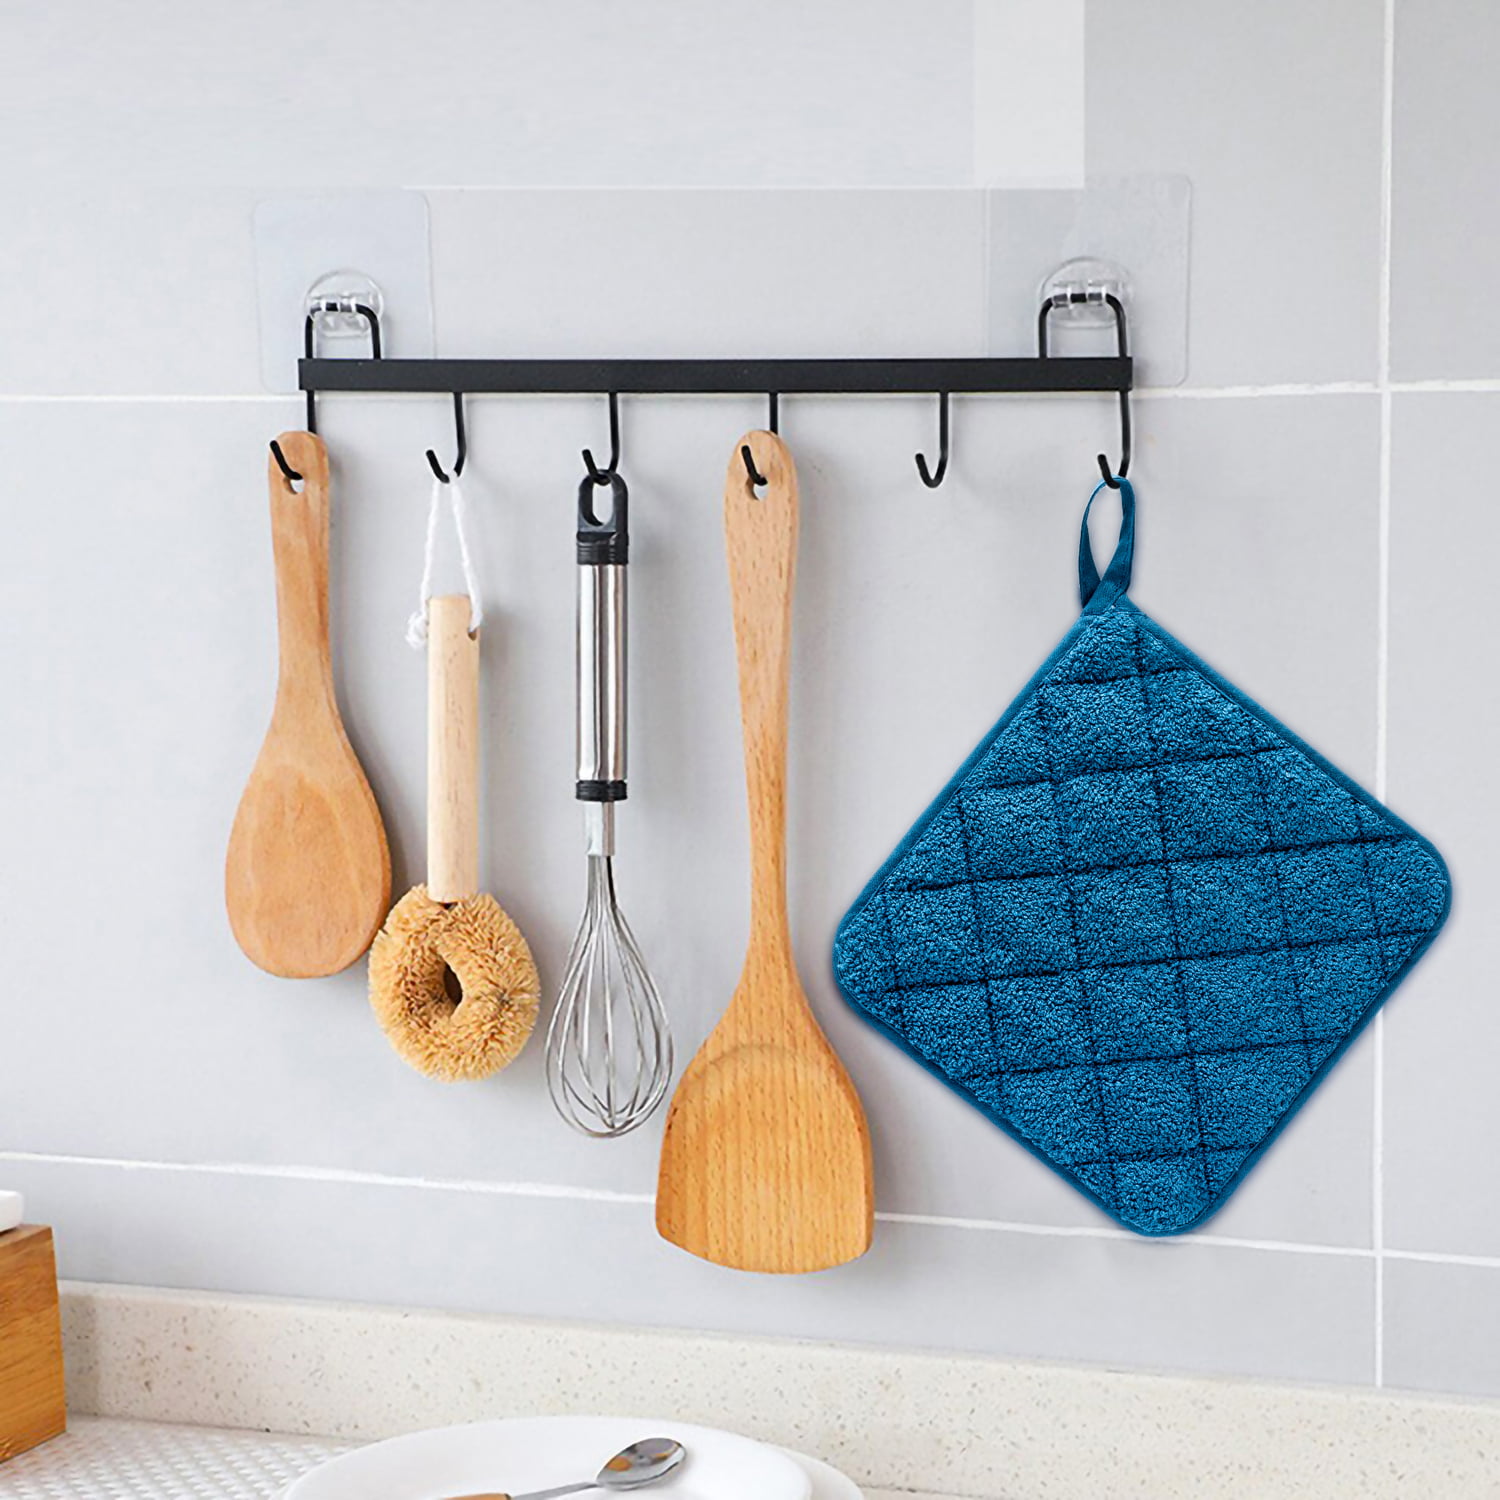 Pot Holders for Kitchen Reflection Guitar Potholders Heat Resistant Non  Slip Hotpads with Pockets Hot Pad for Kitchen Cooking Baking Barbecue 8 x 8  in